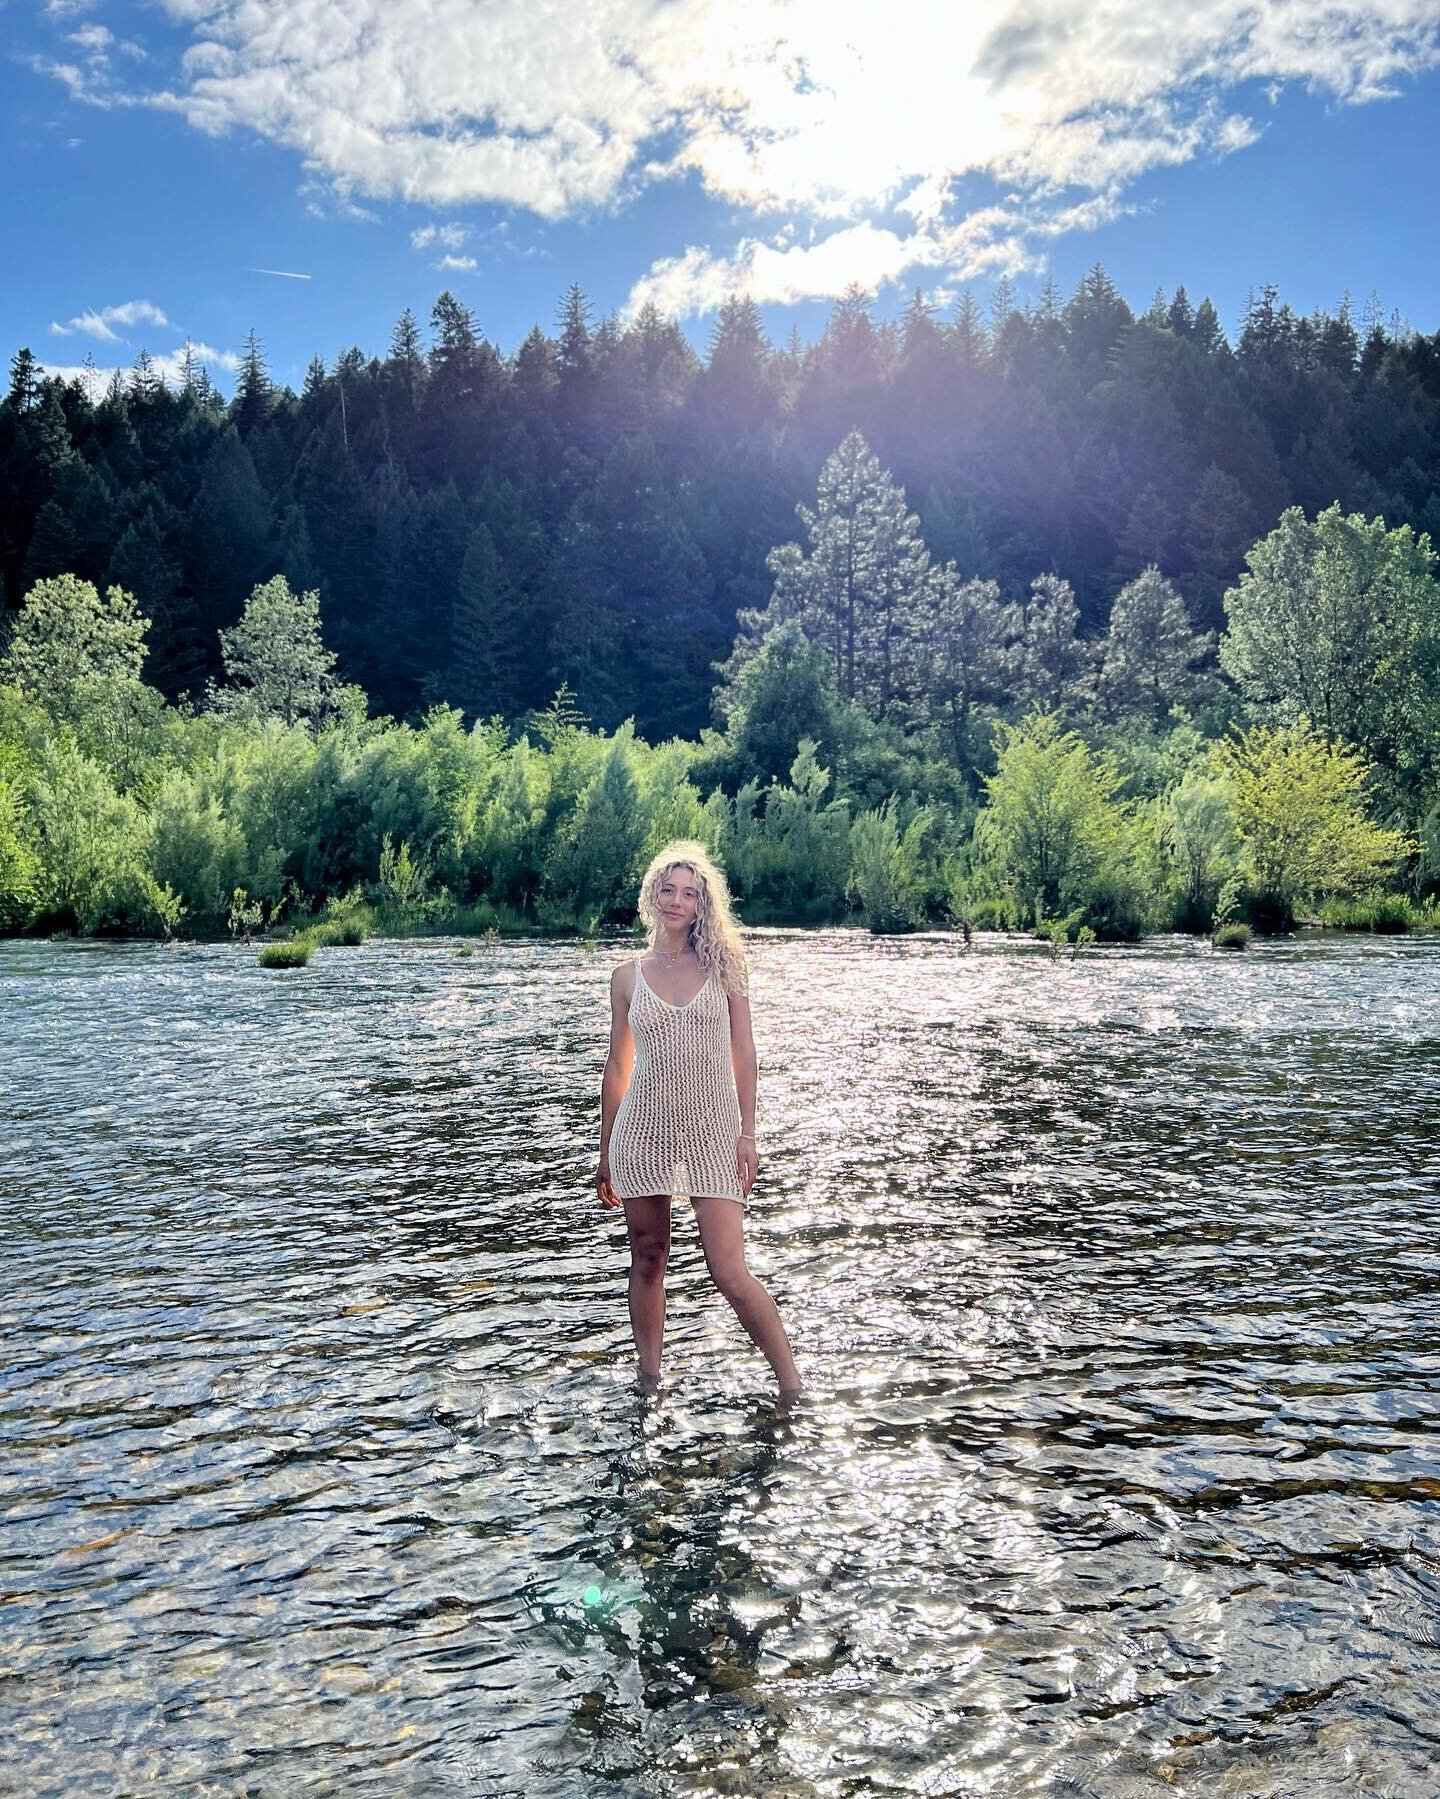 be free 〰️
your love is like water
it changes
but it never stops
 &mdash; @lookitsnyoh 

@spiritweavers 
@alexwillisfleming 

washed in love and reborn 
after my time in oregon
unplugged &amp;
surrounded by nature,
community, sisterhood,
sacred songs